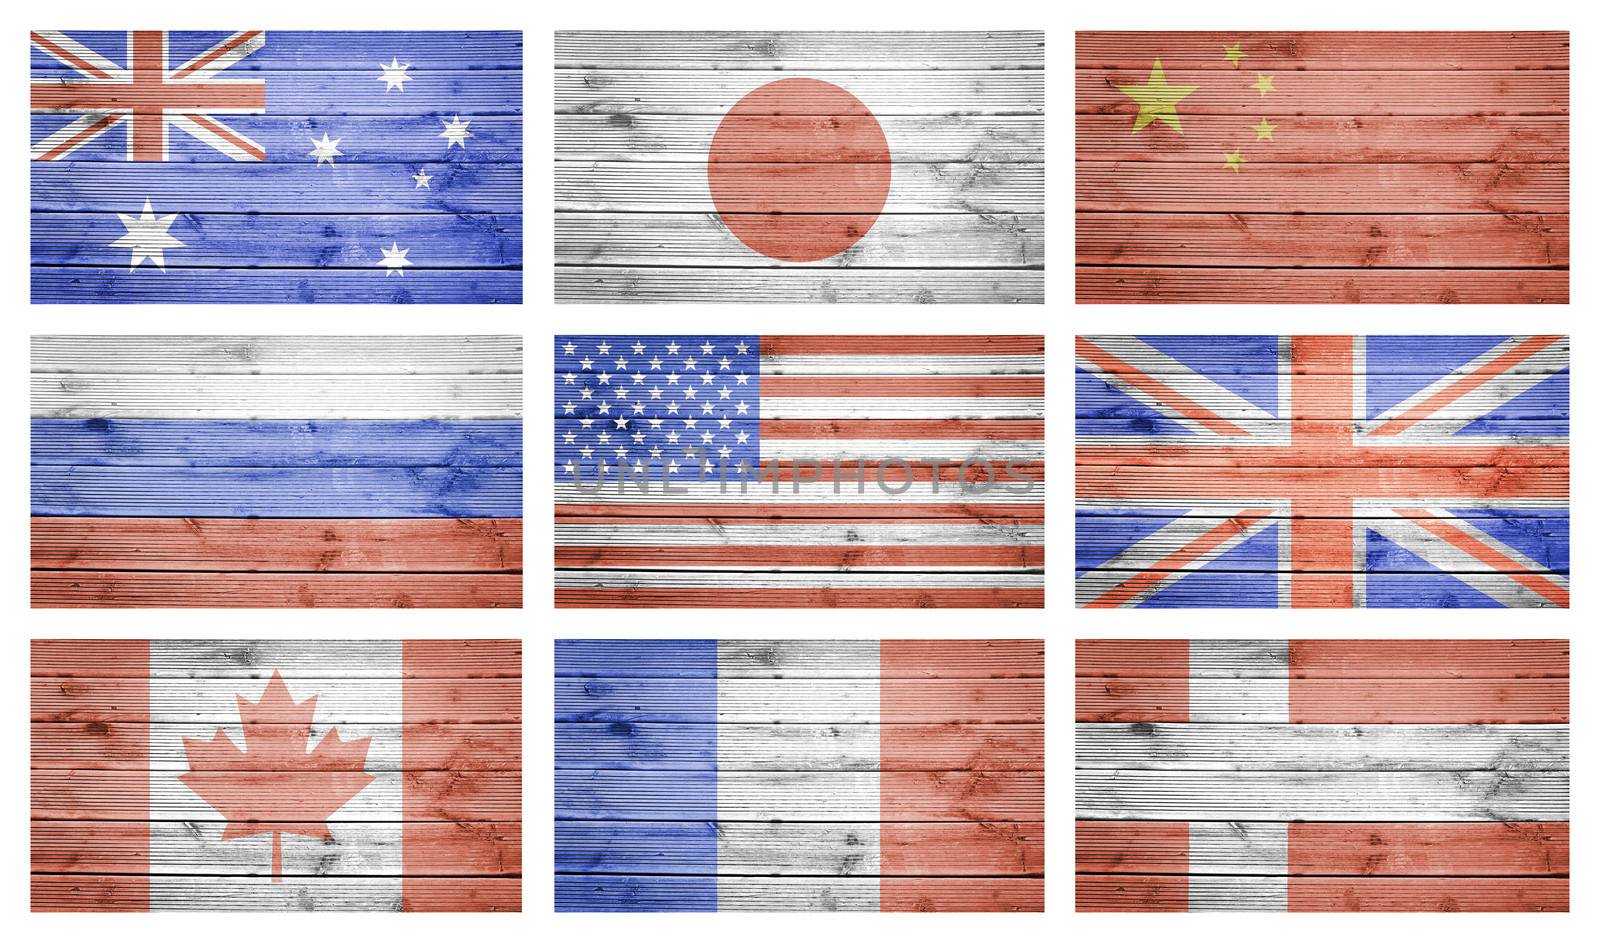 World flags collage over wood planks texture by doble.d